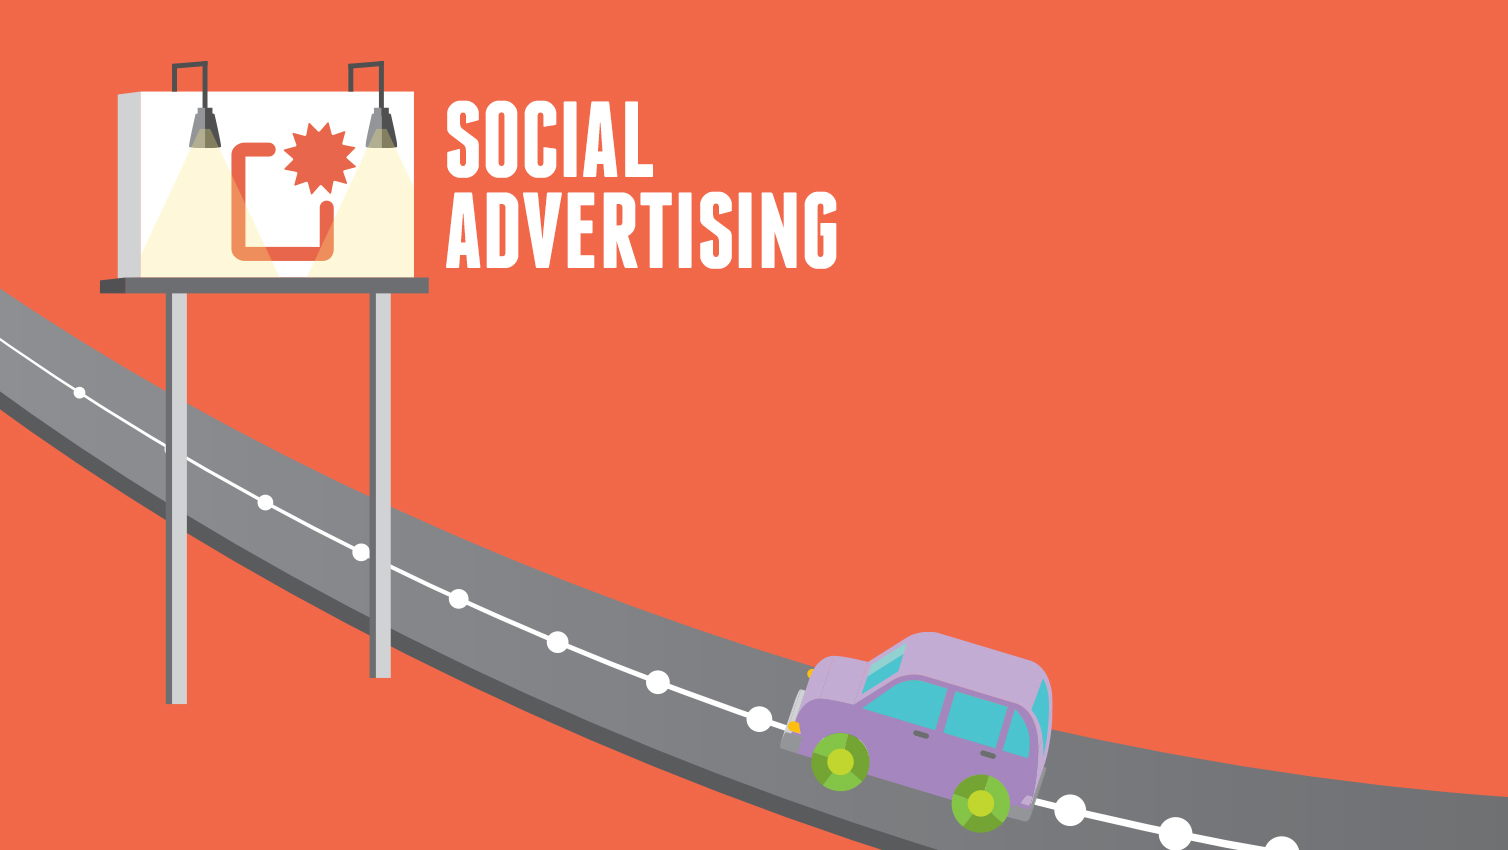 New Research: Get Key Facebook Advertising Metrics in our Social Advertising Benchmark Report